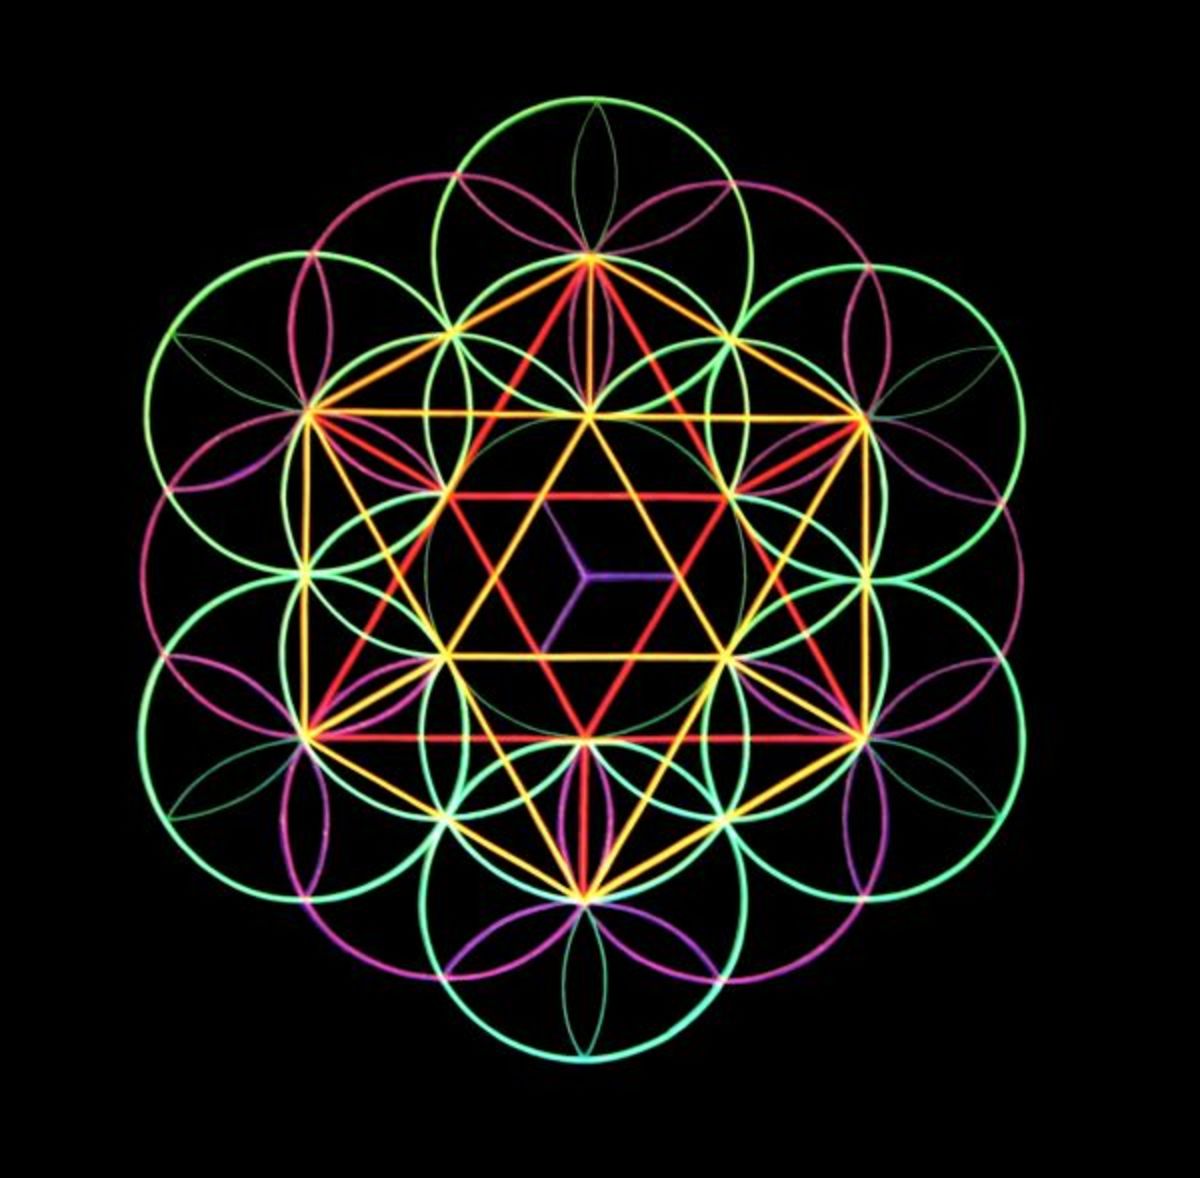 Using the Flower Of Life we can easily distinguish the Hexagon shape outlined from the Seed of Life contain within.